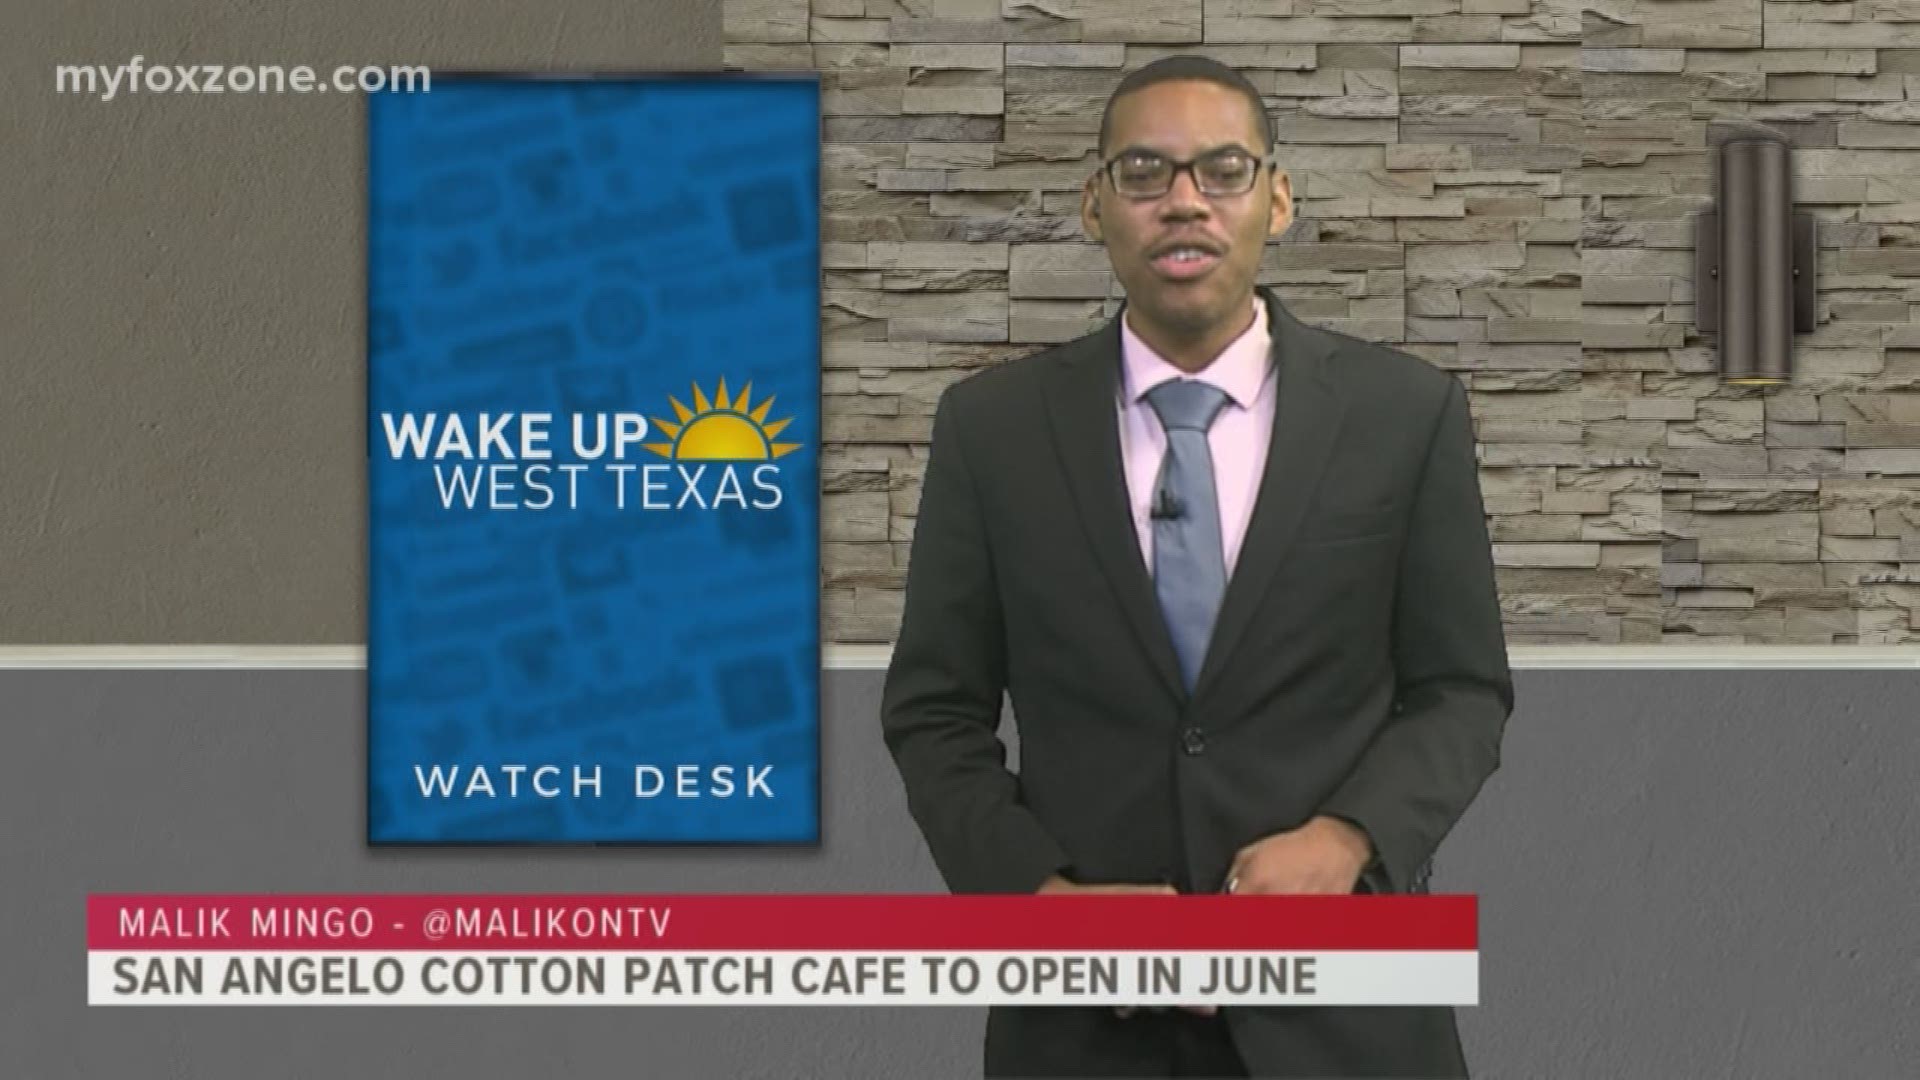 Our Malik Mingo shares what some of you are saying about the new Cotton Patch Cafe coming to San Angelo.